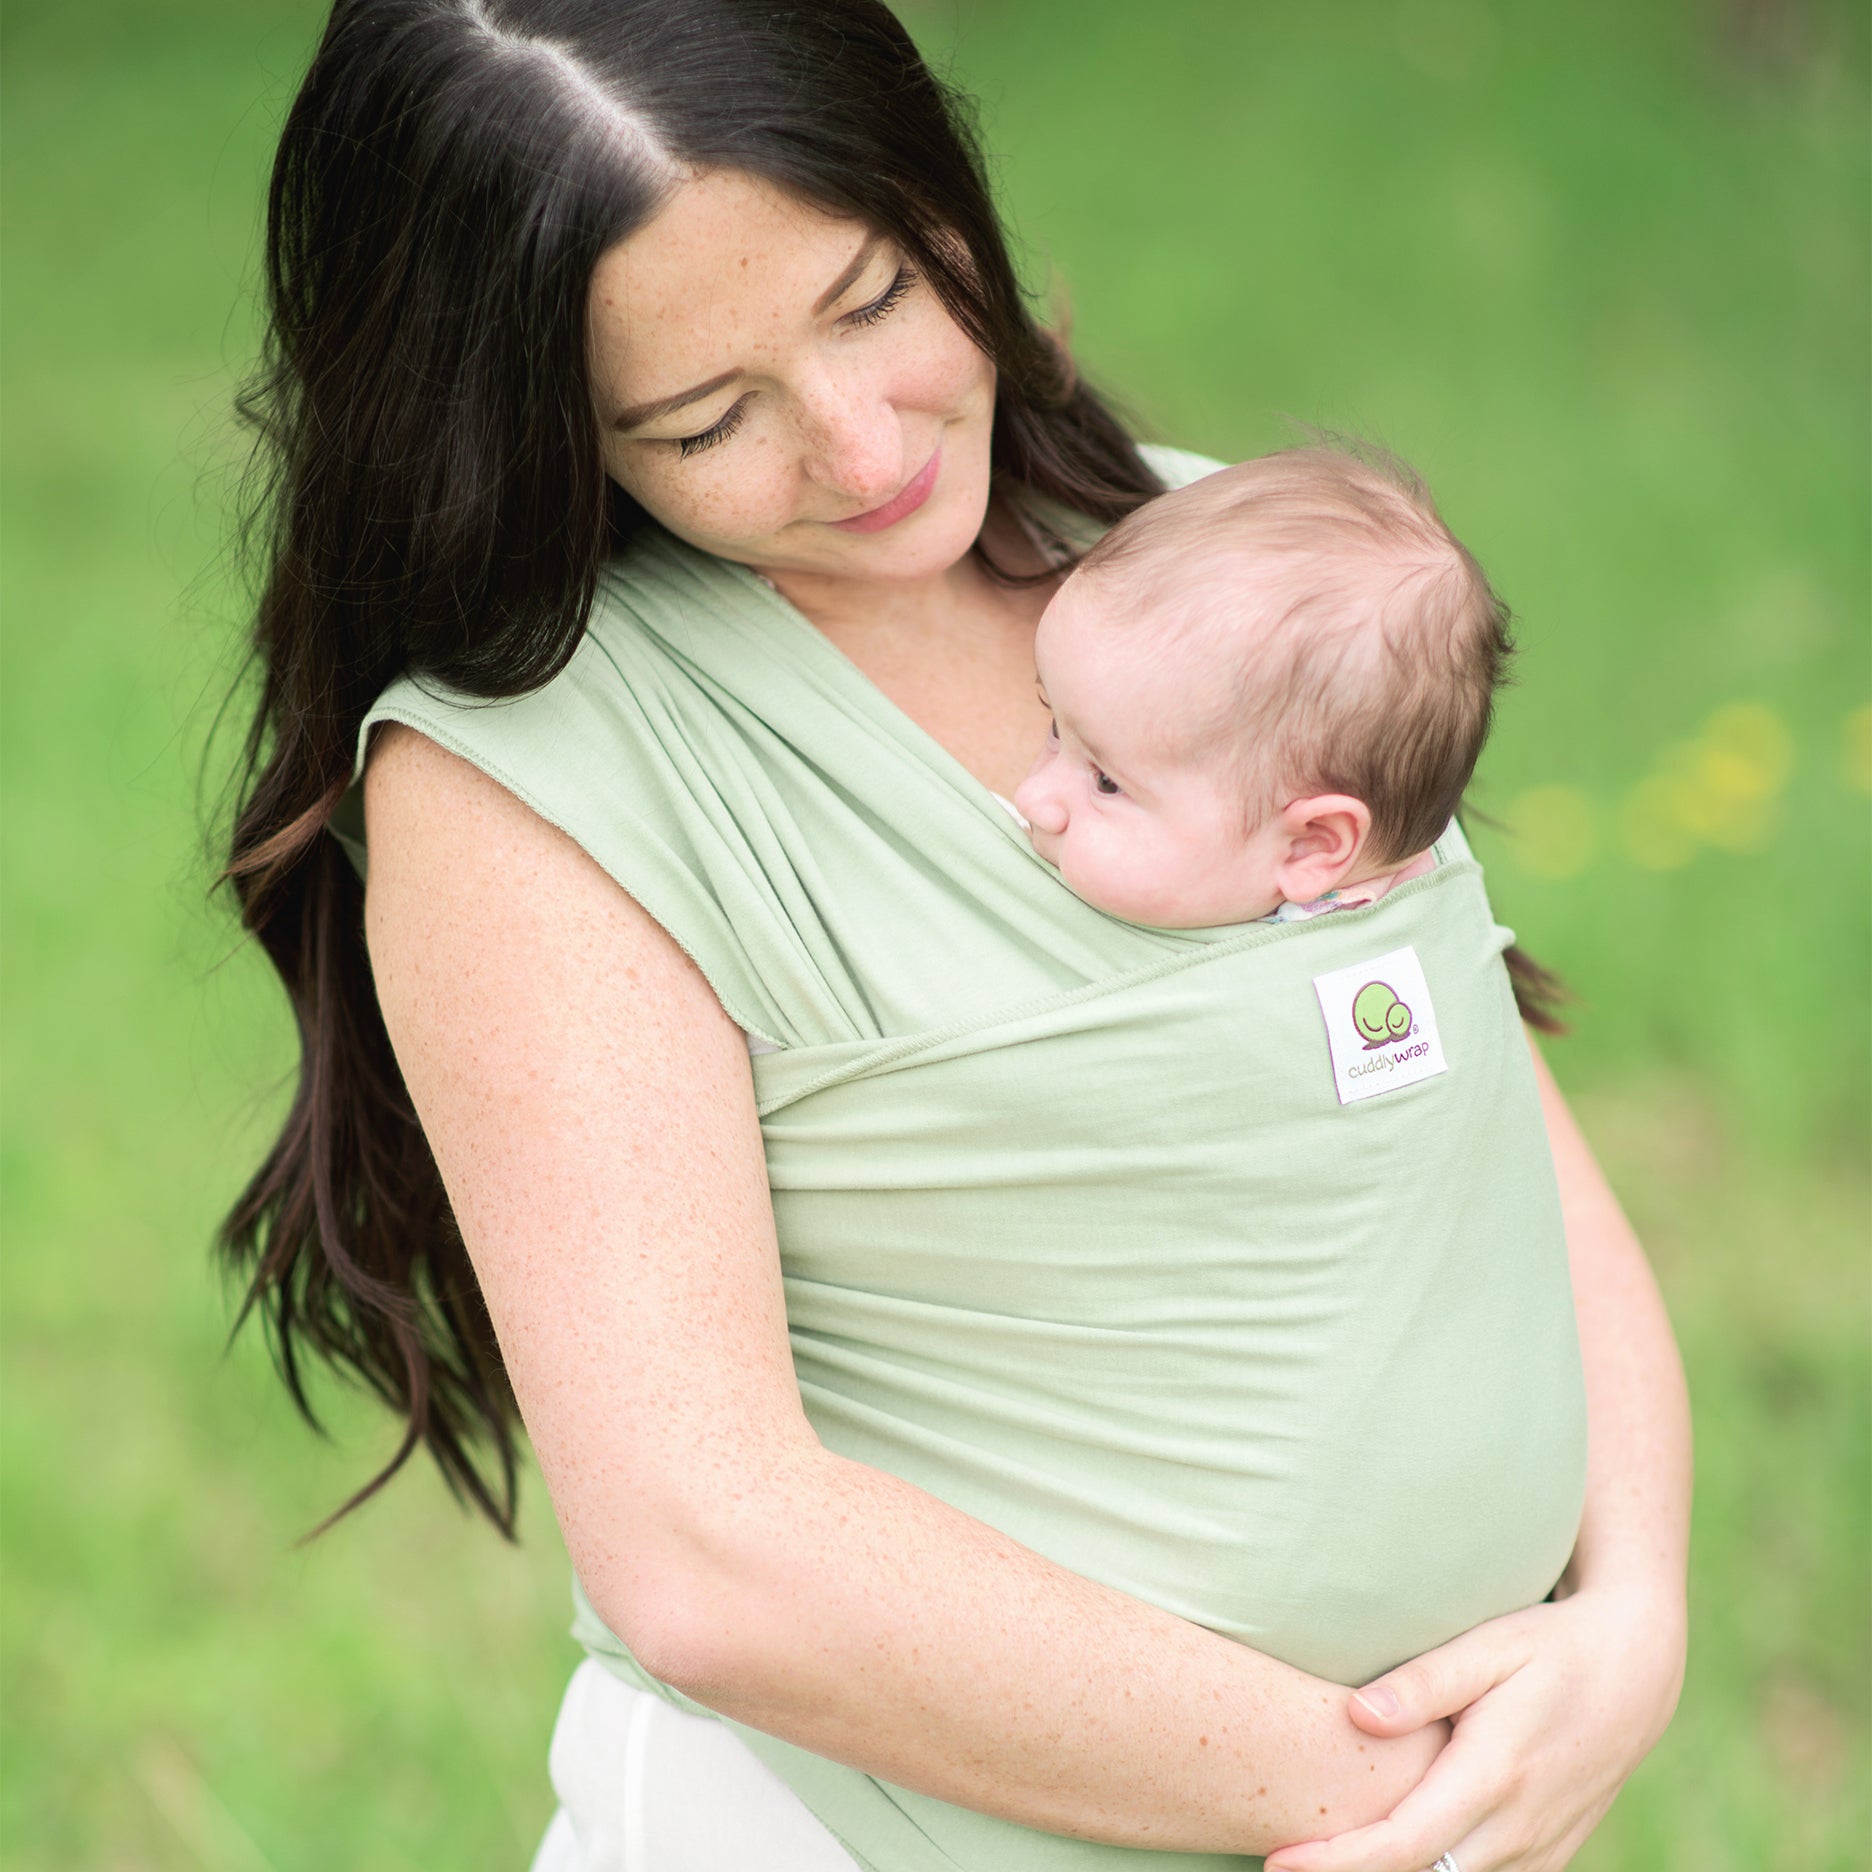 CuddlyWrap – New and Green Baby Co